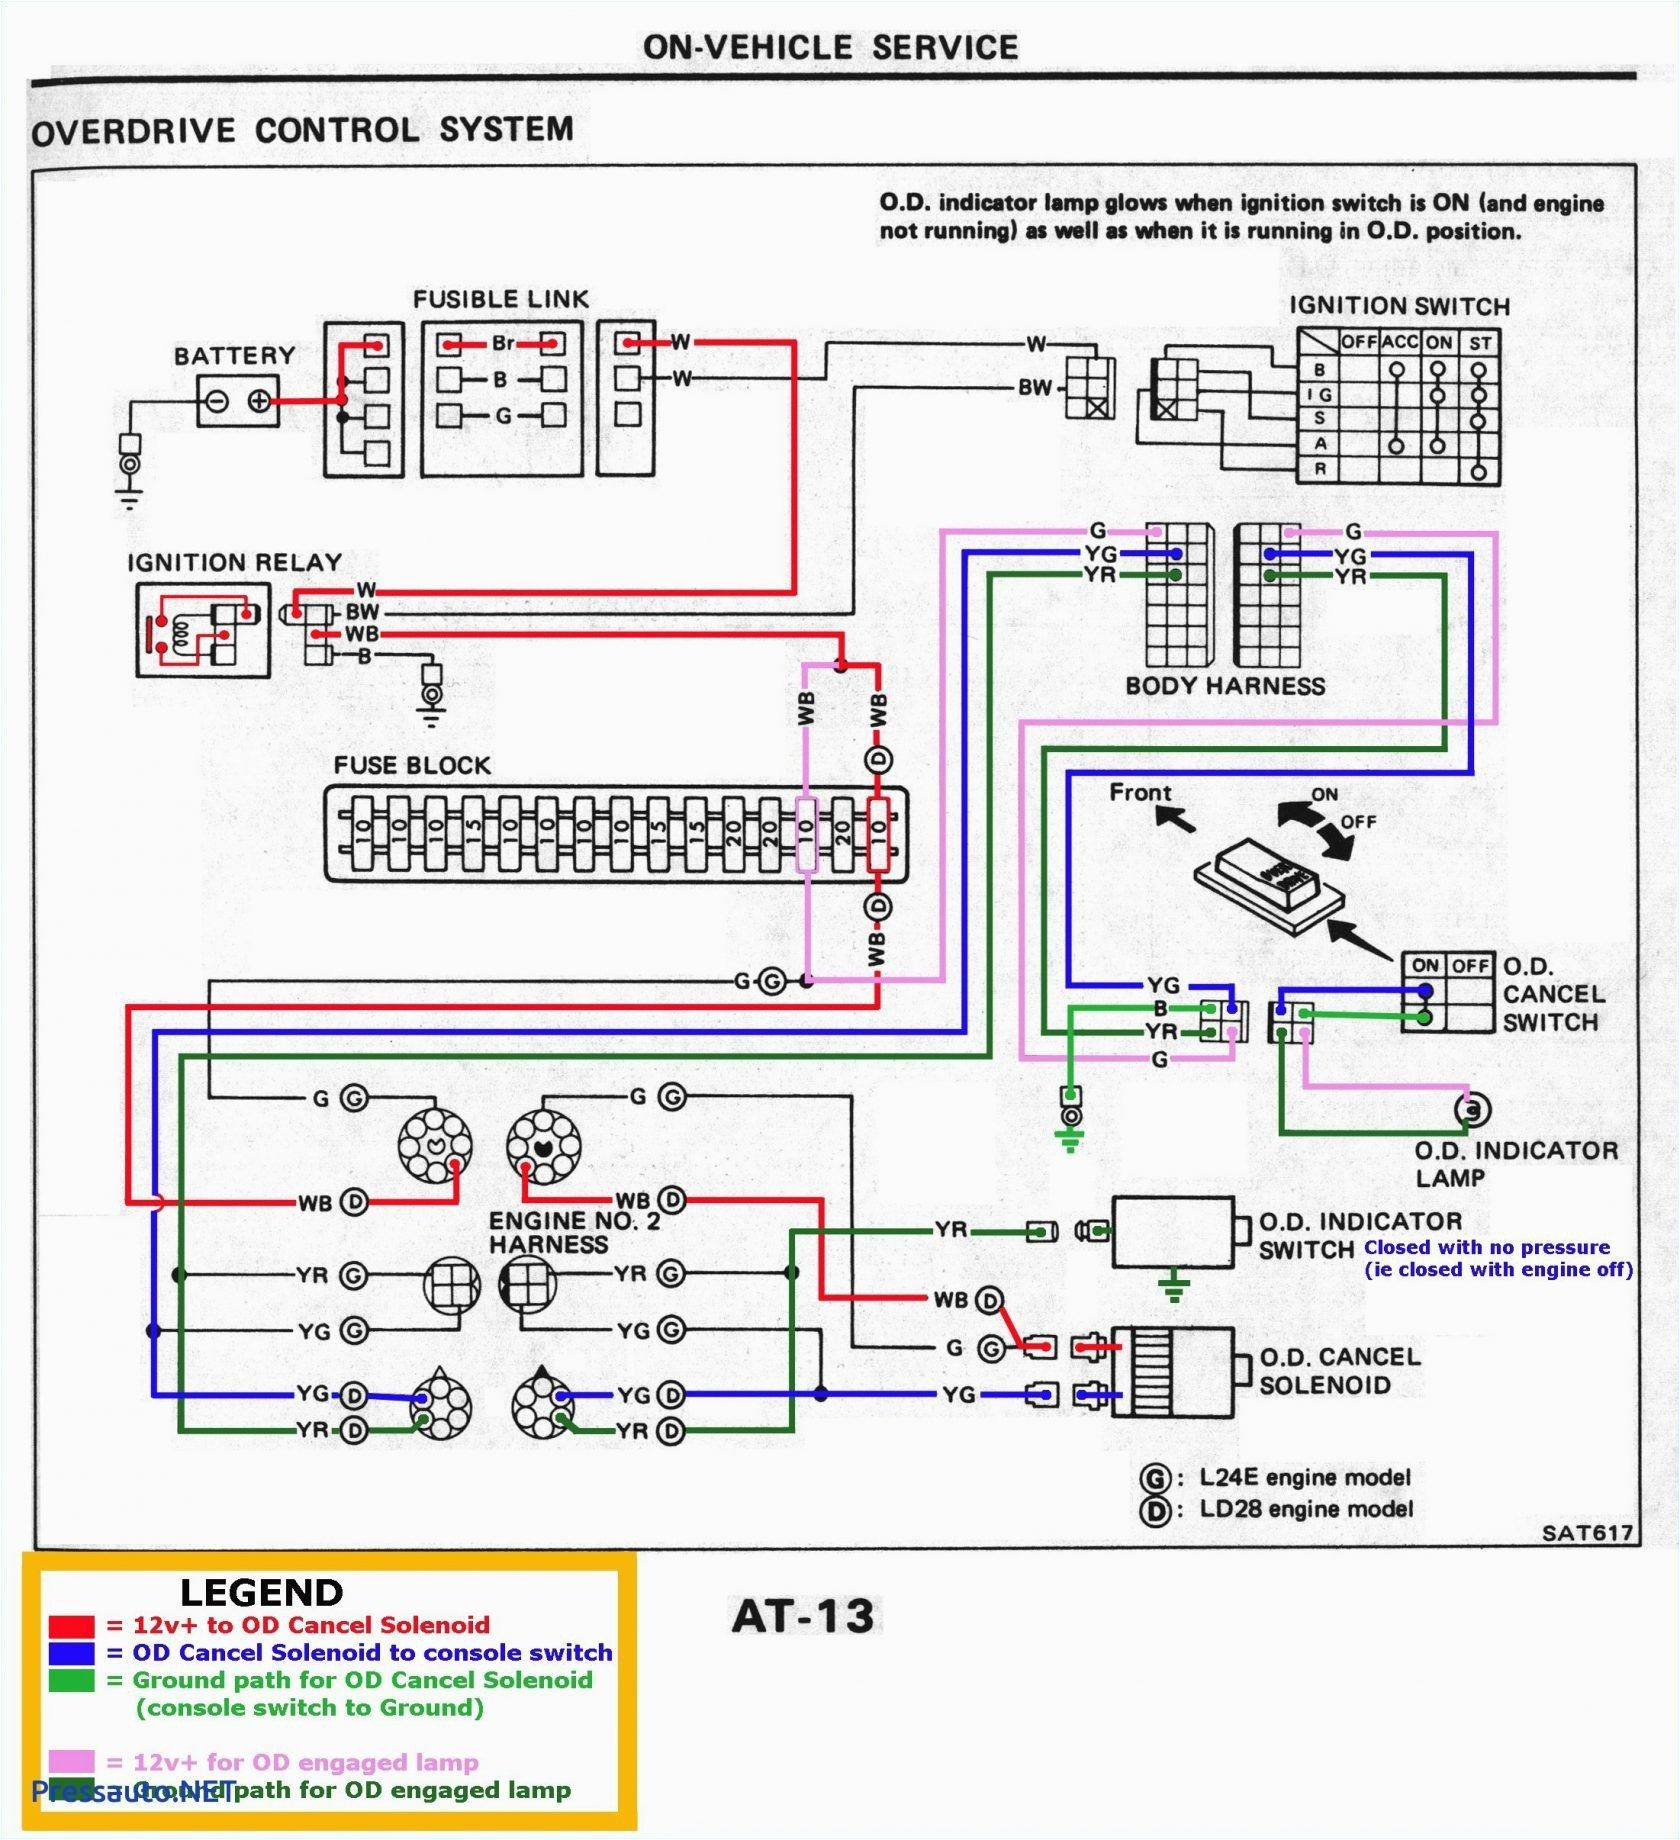 2001 jeep wiring harness diagram wiring diagrams konsult 2001 jeep grand cherokee trailer wiring harness 2001 jeep wiring harness